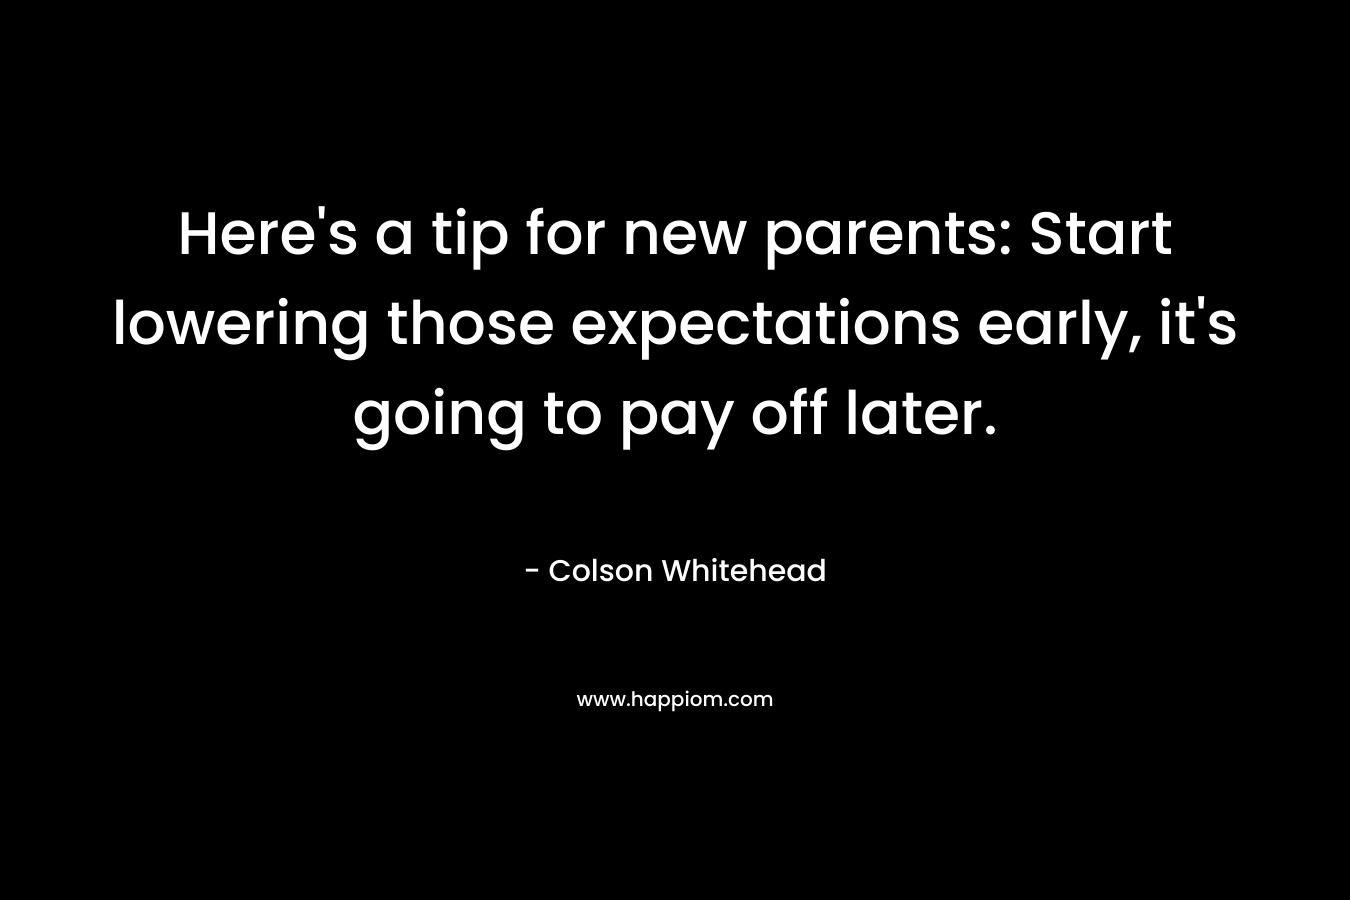 Here’s a tip for new parents: Start lowering those expectations early, it’s going to pay off later. – Colson Whitehead